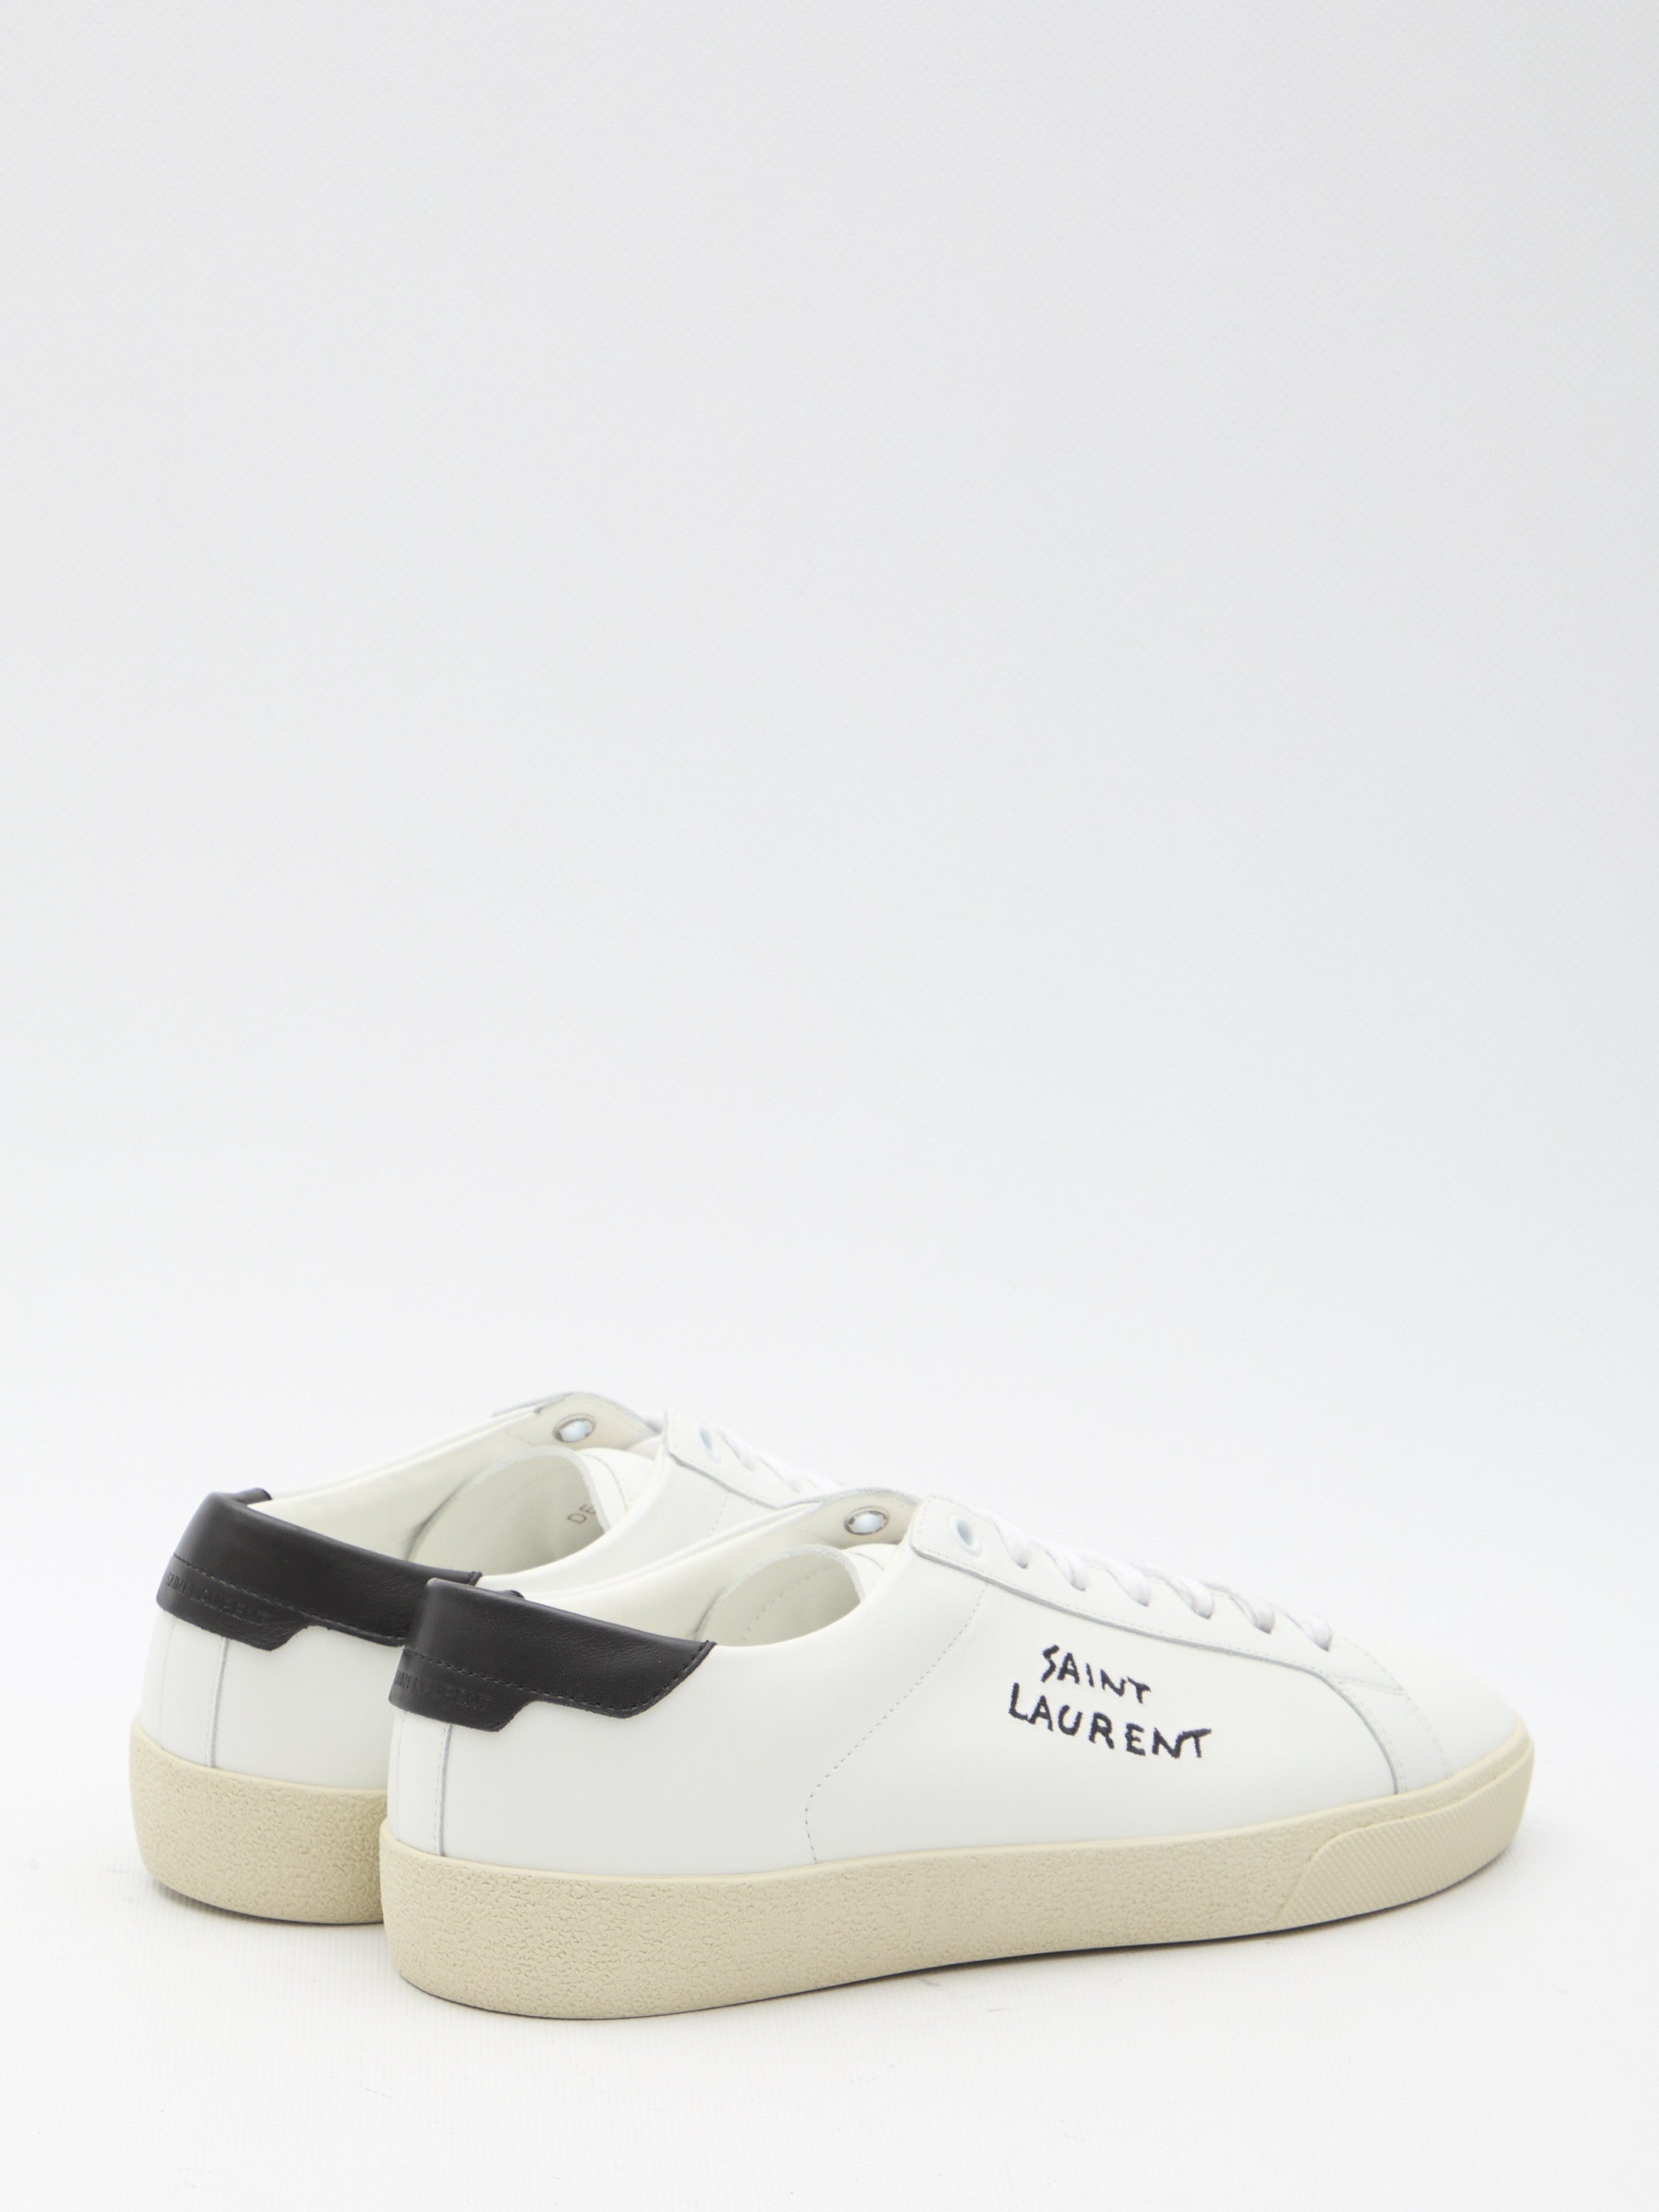 SAINT-LAURENT-OUTLET-SALE-Court-SL06-sneakers-Sneakers-ARCHIVE-COLLECTION-3.jpg